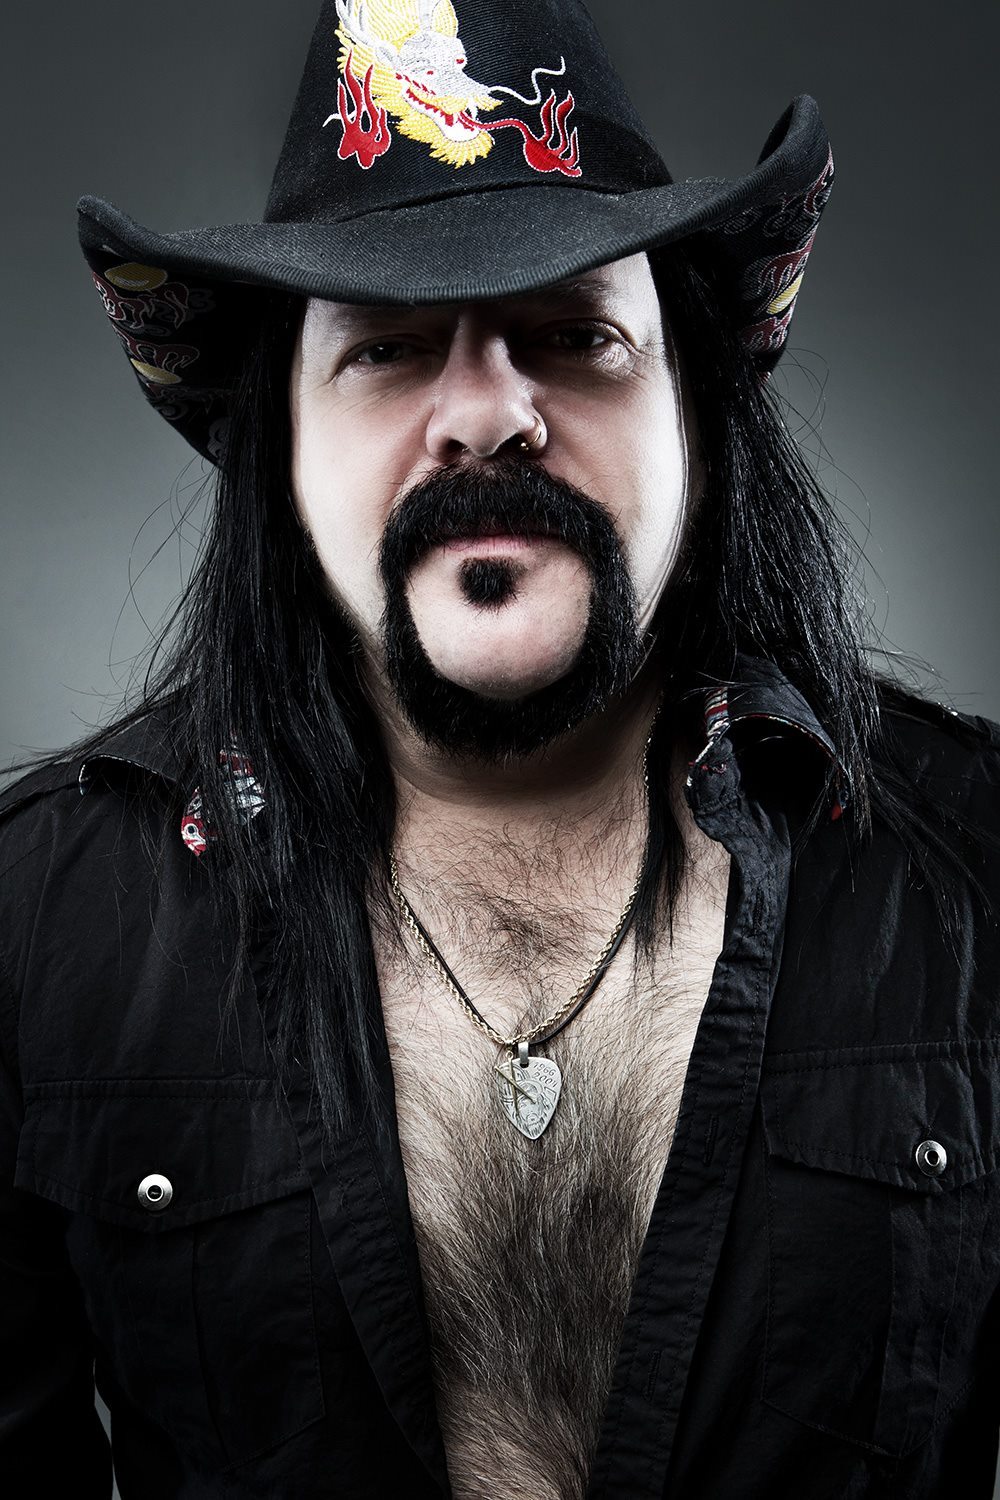 Photos and video available of Vinnie Paul’s funeral & public memorial